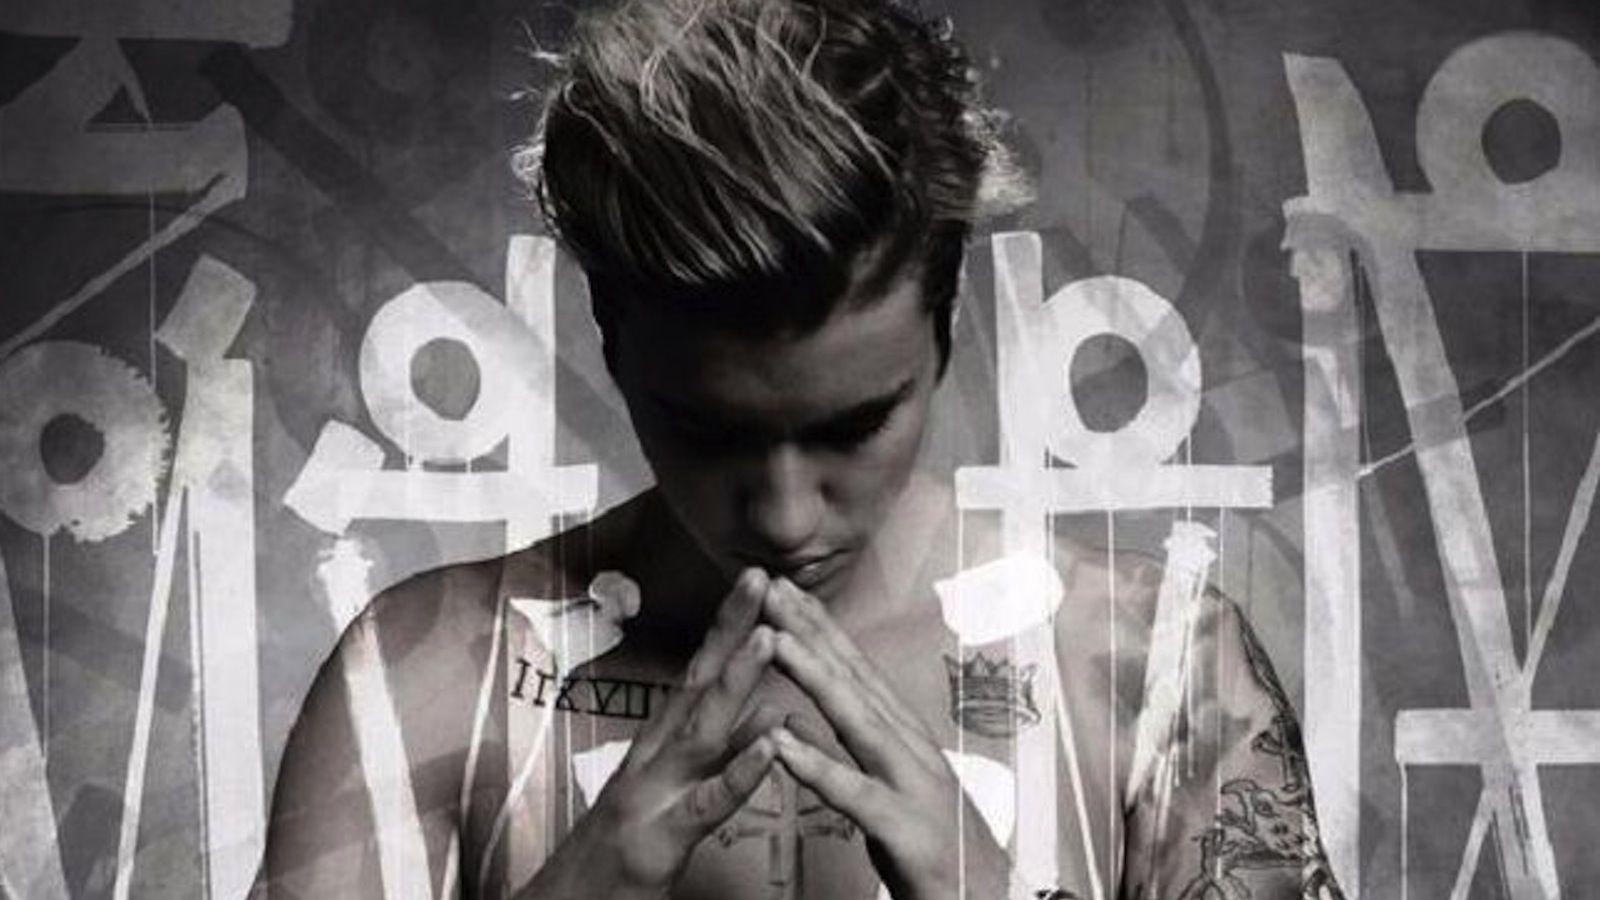 Justin Bieber Just Released An Album, And It's Moody AF